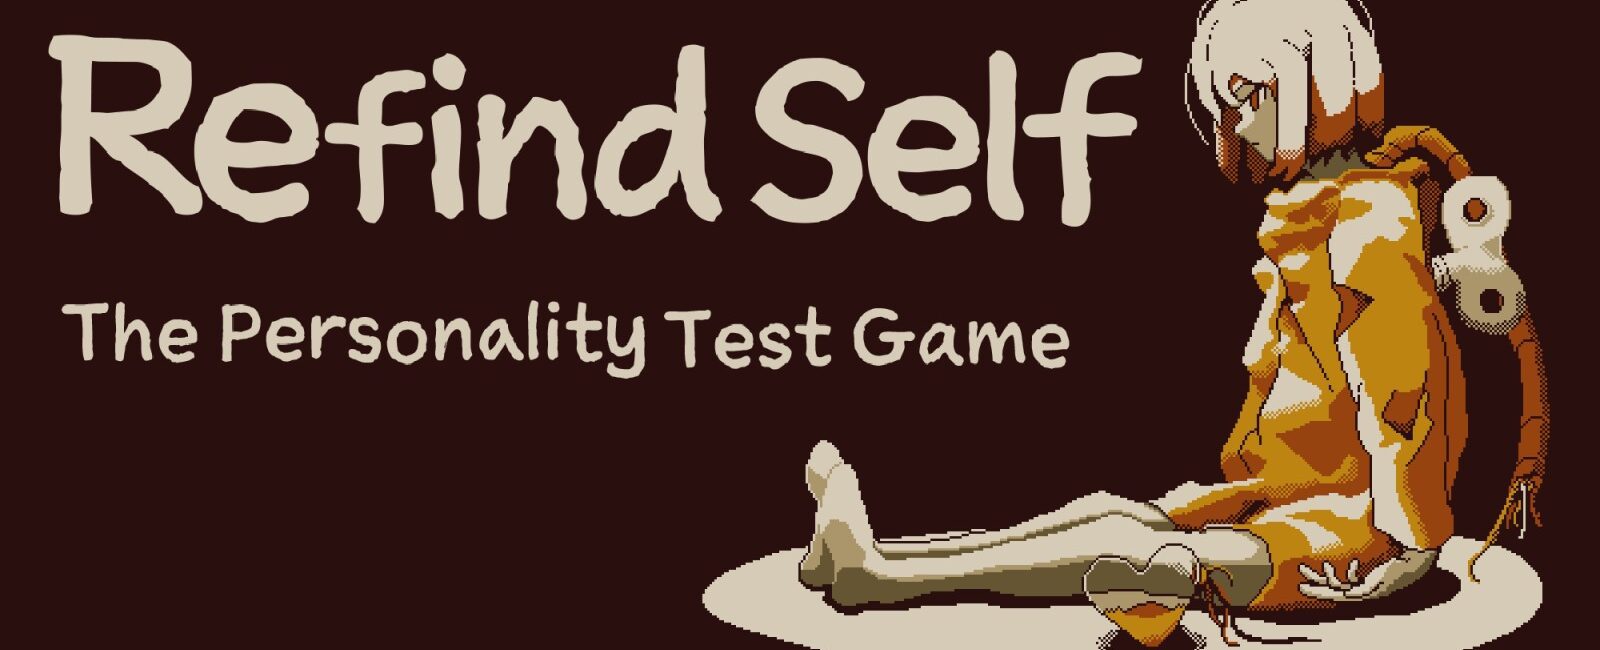 Refind Self: The Personality Test Game nintendo switch game cover